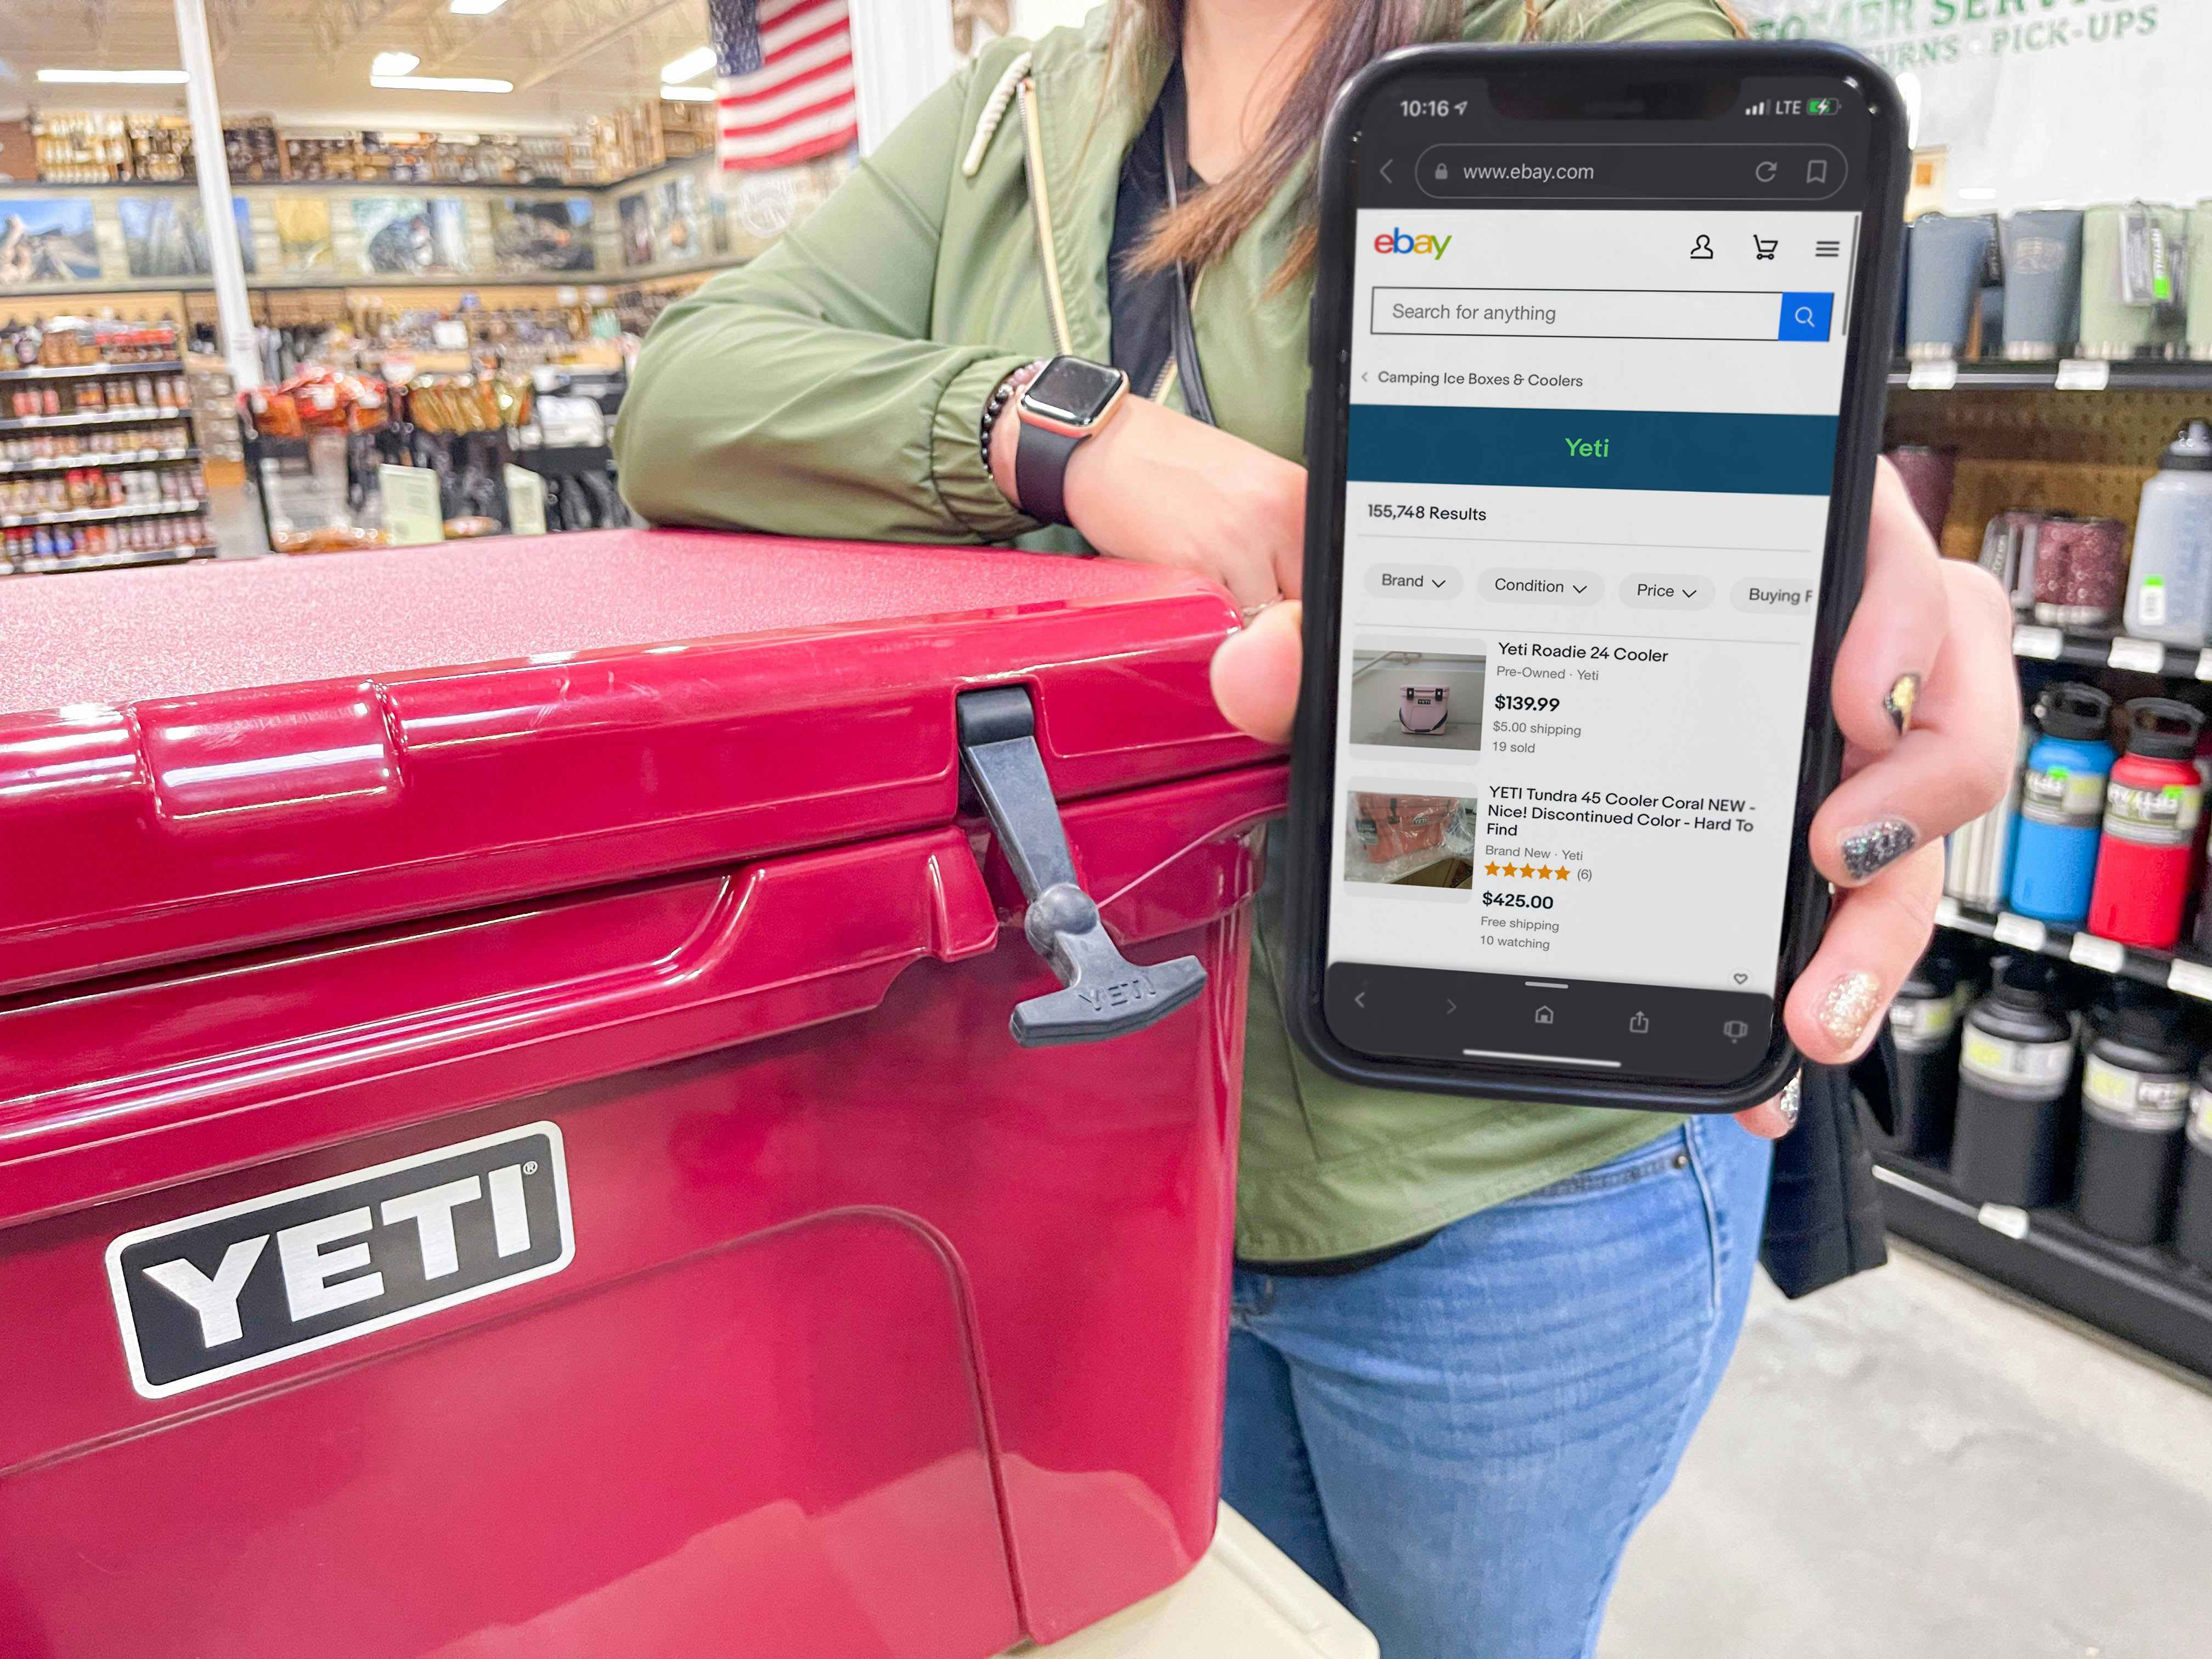 A person resting their elbow on a Yeti cooler and holding up their iPhone displaying the search results for Yeti on the eBay app.